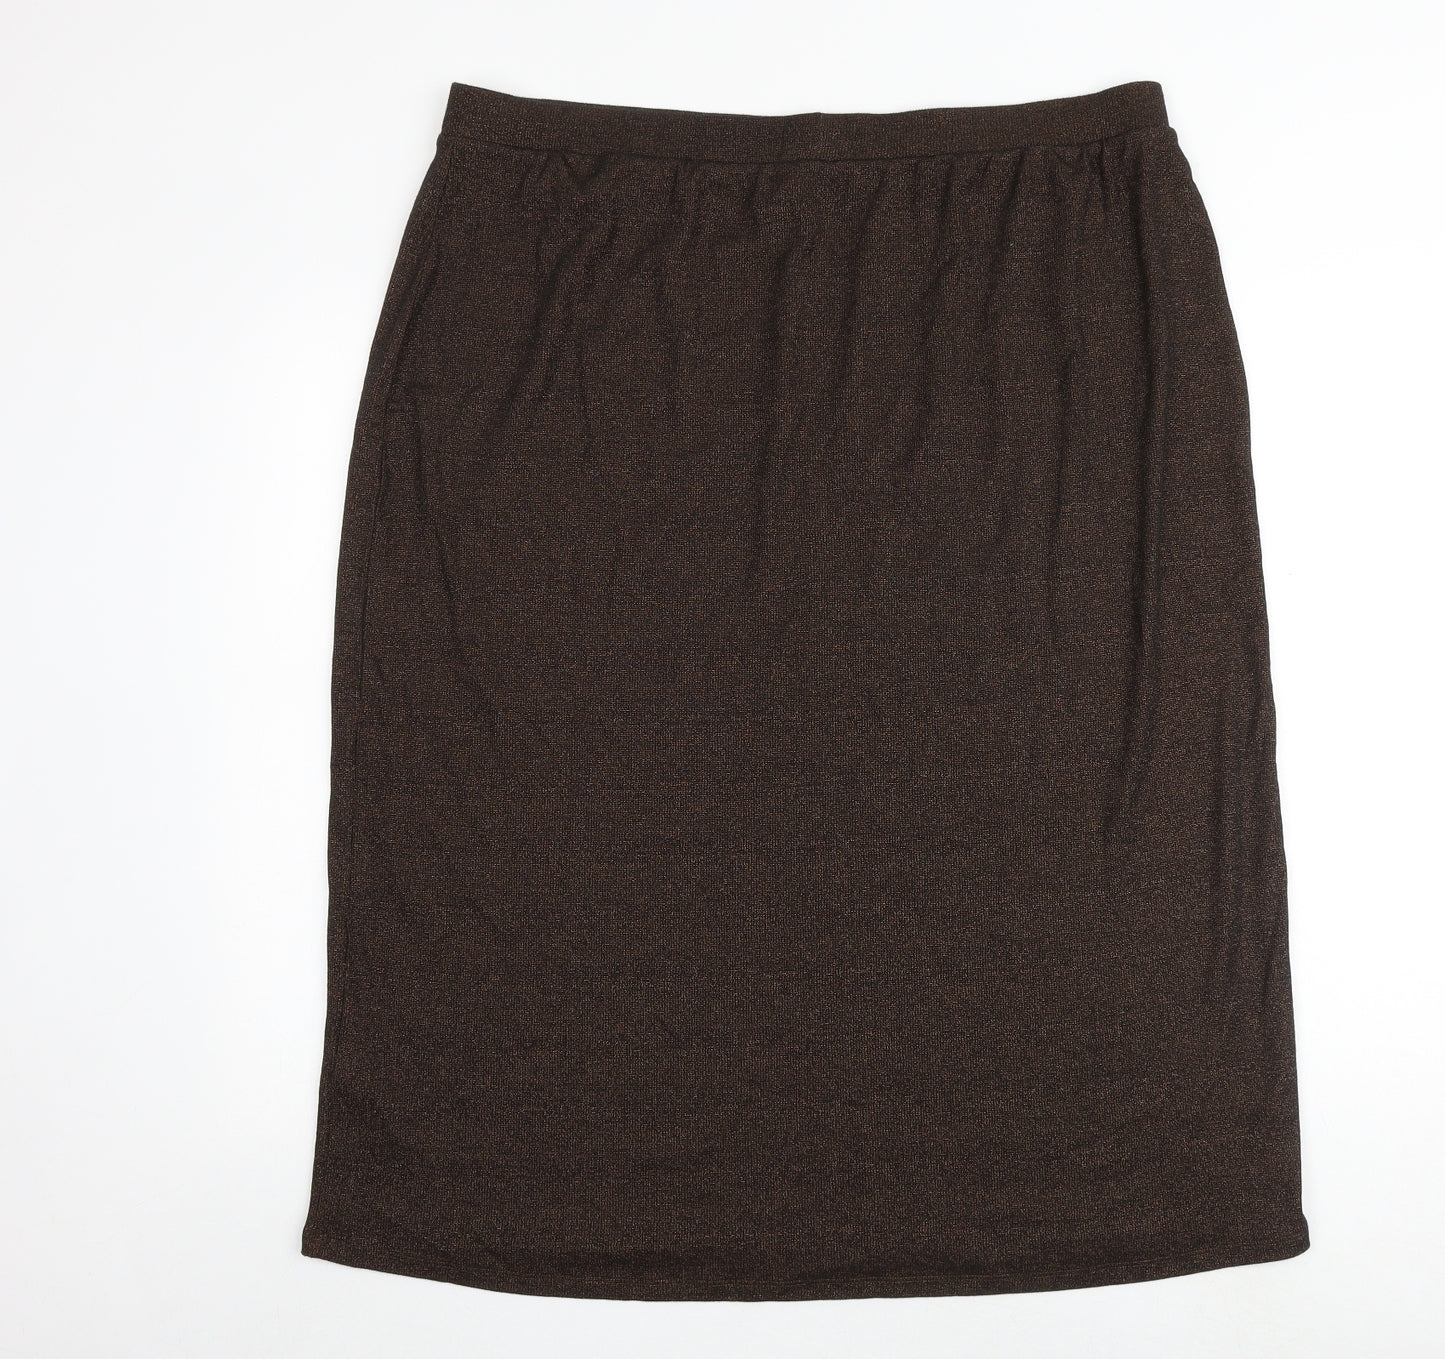 Marks and Spencer Womens Brown Cotton A-Line Skirt Size 22